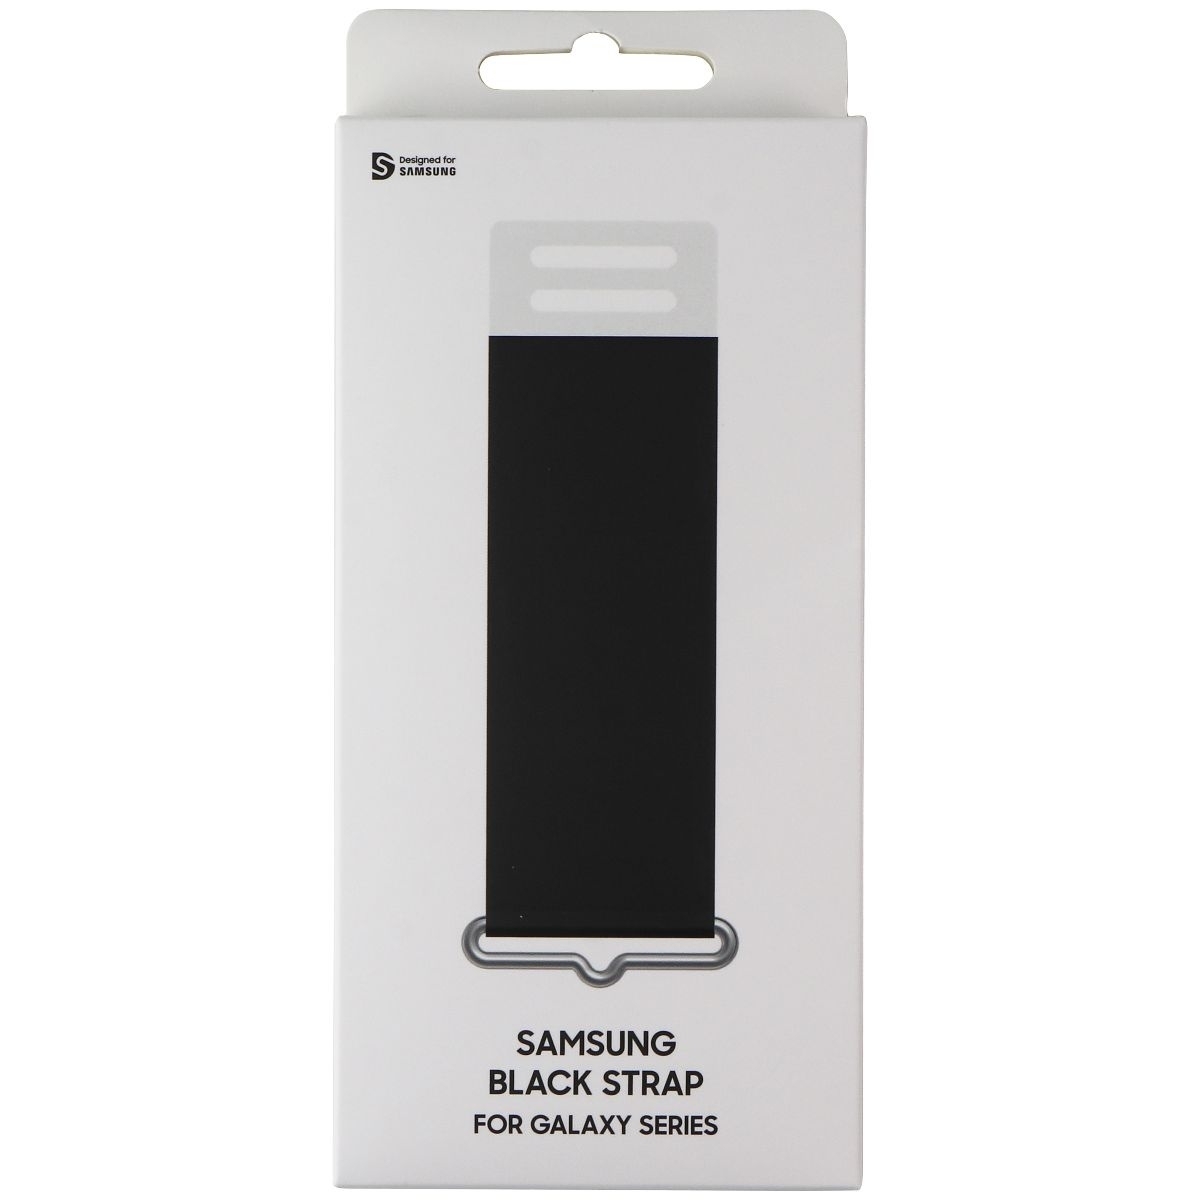 Samsung Official Black Strap For Galaxy Series Silicone Cases (GP-TKU021HOABW)